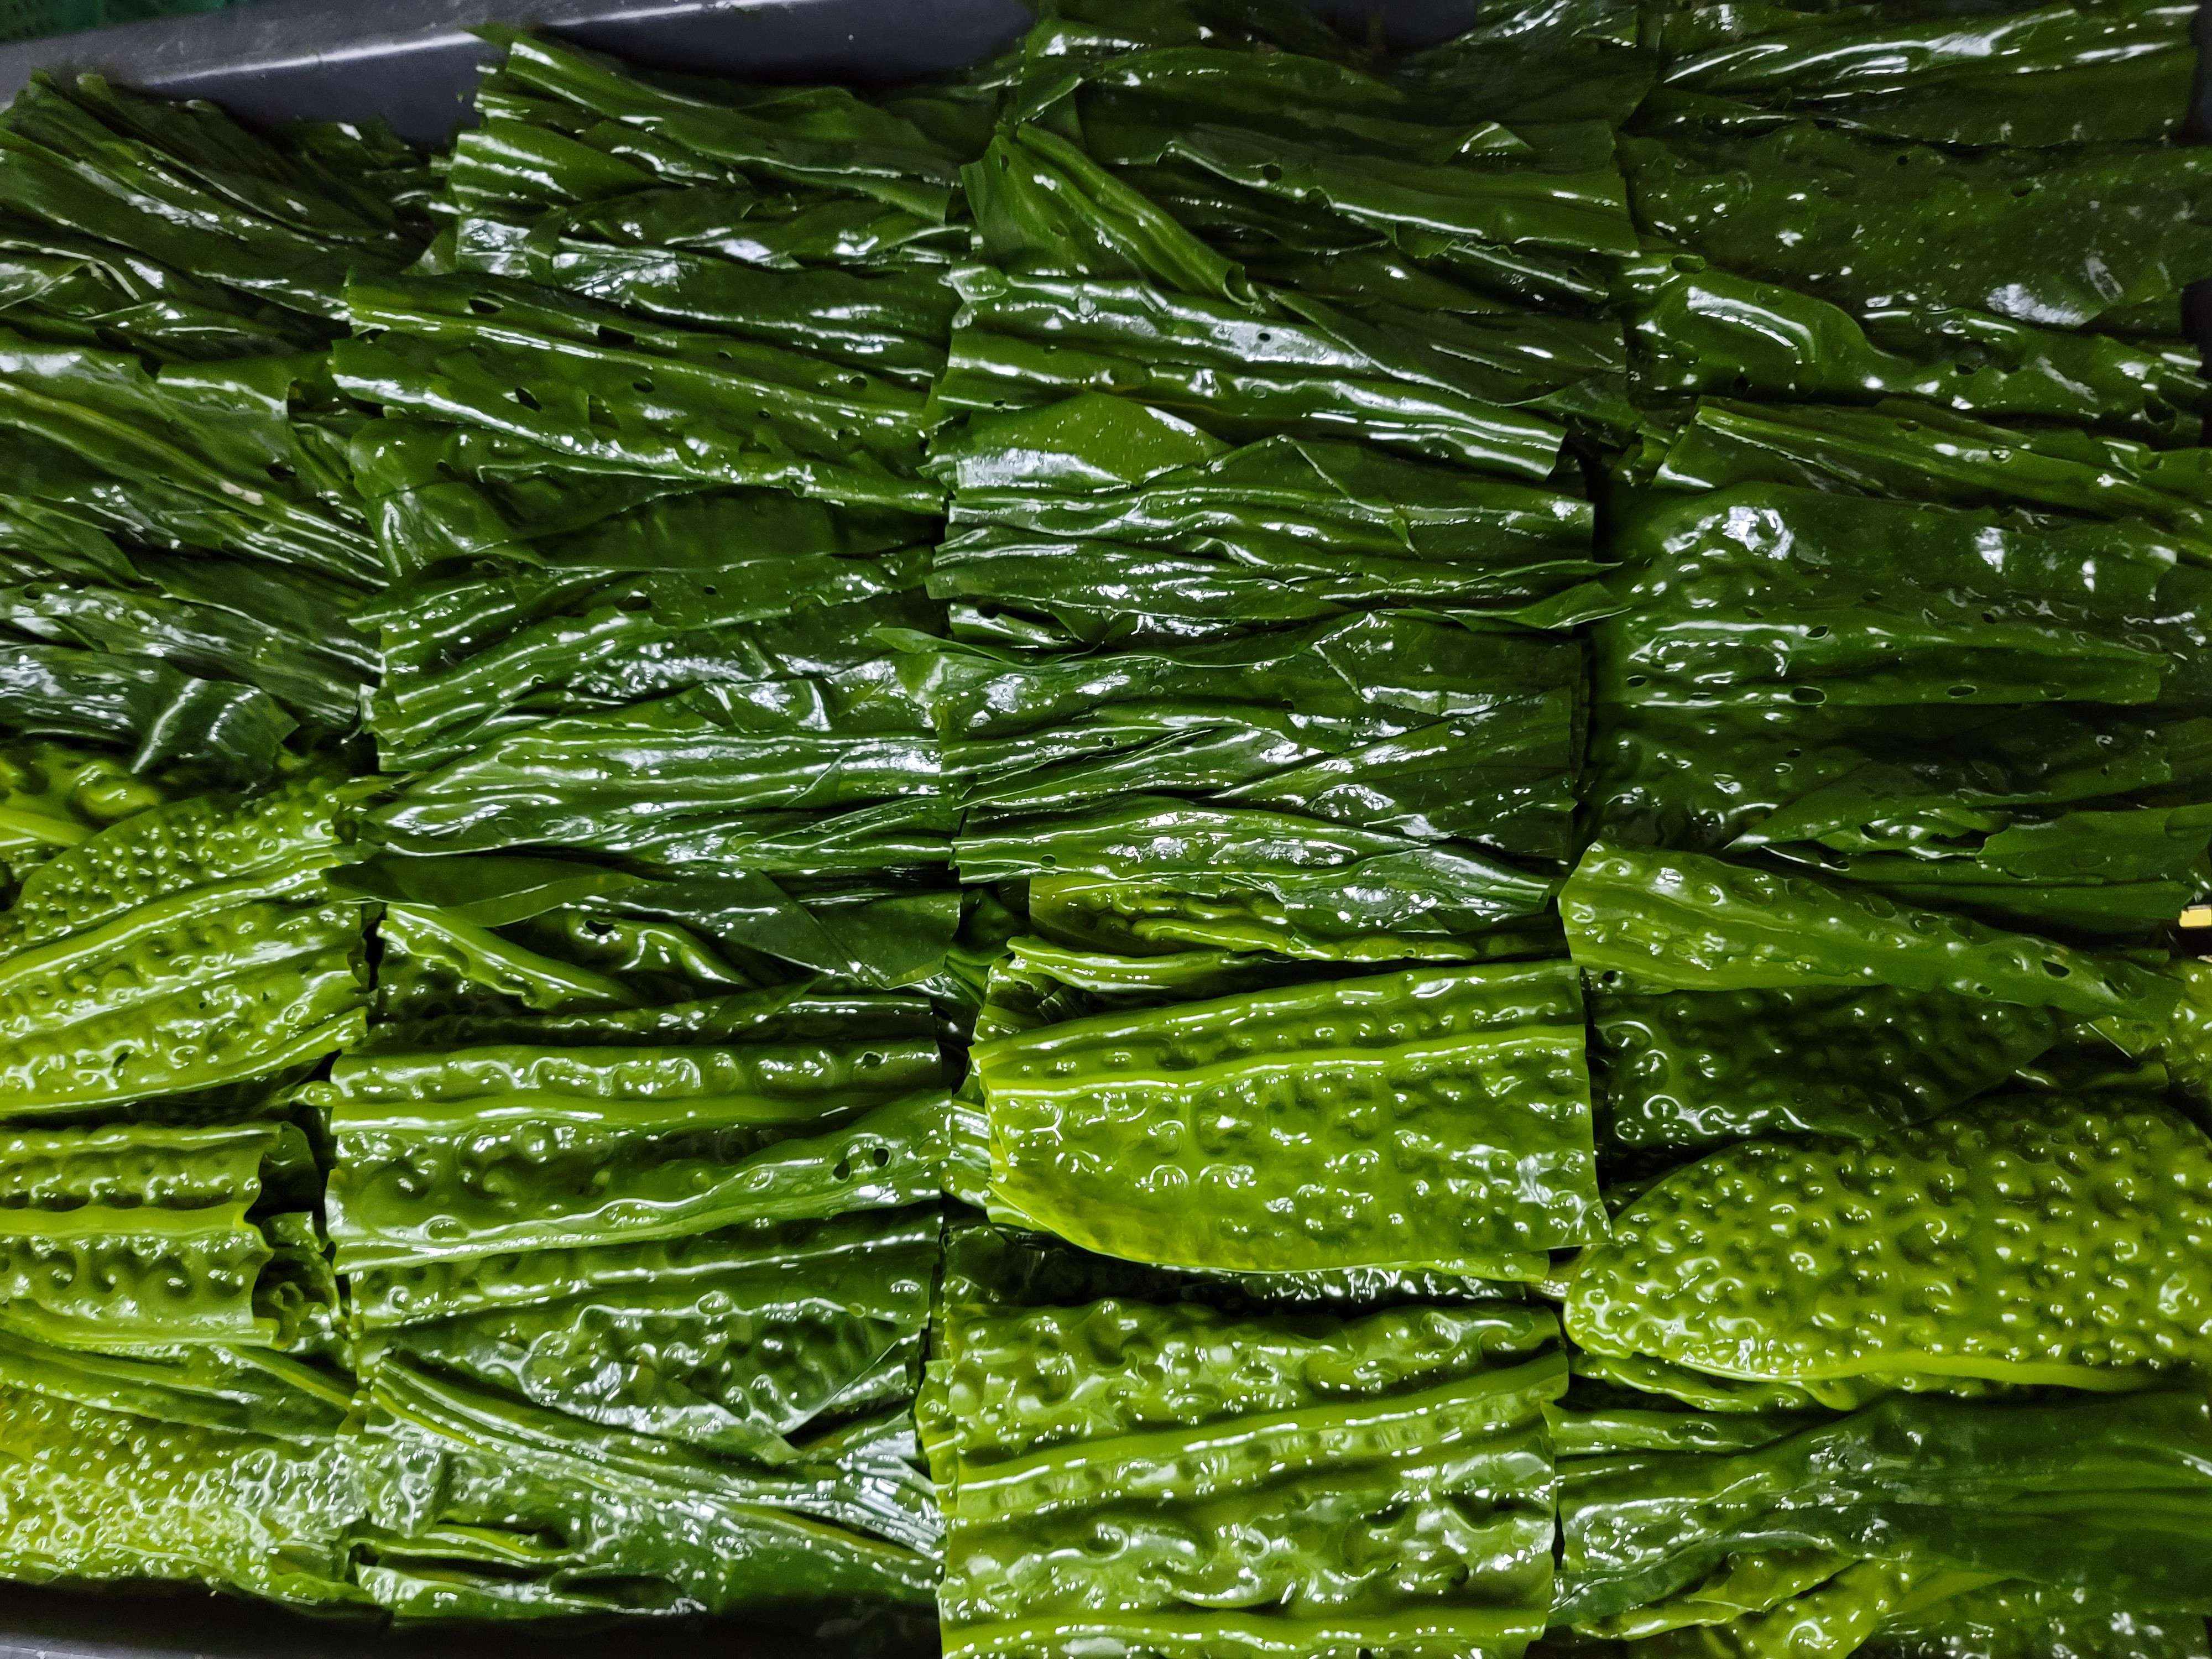 Trimmed Seaweed to eat instantly